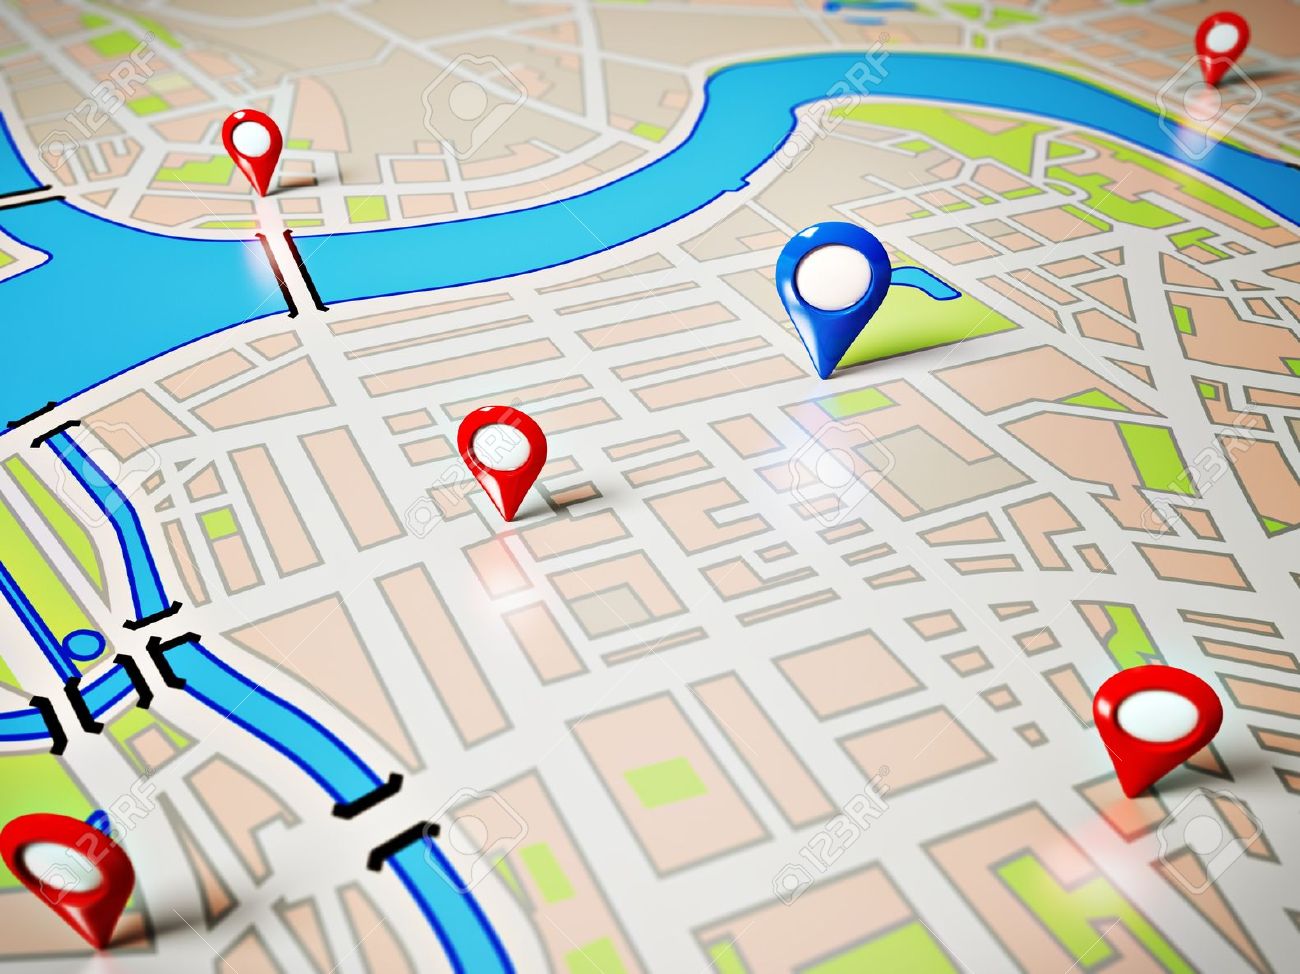 How to track a cell phone location without installing software